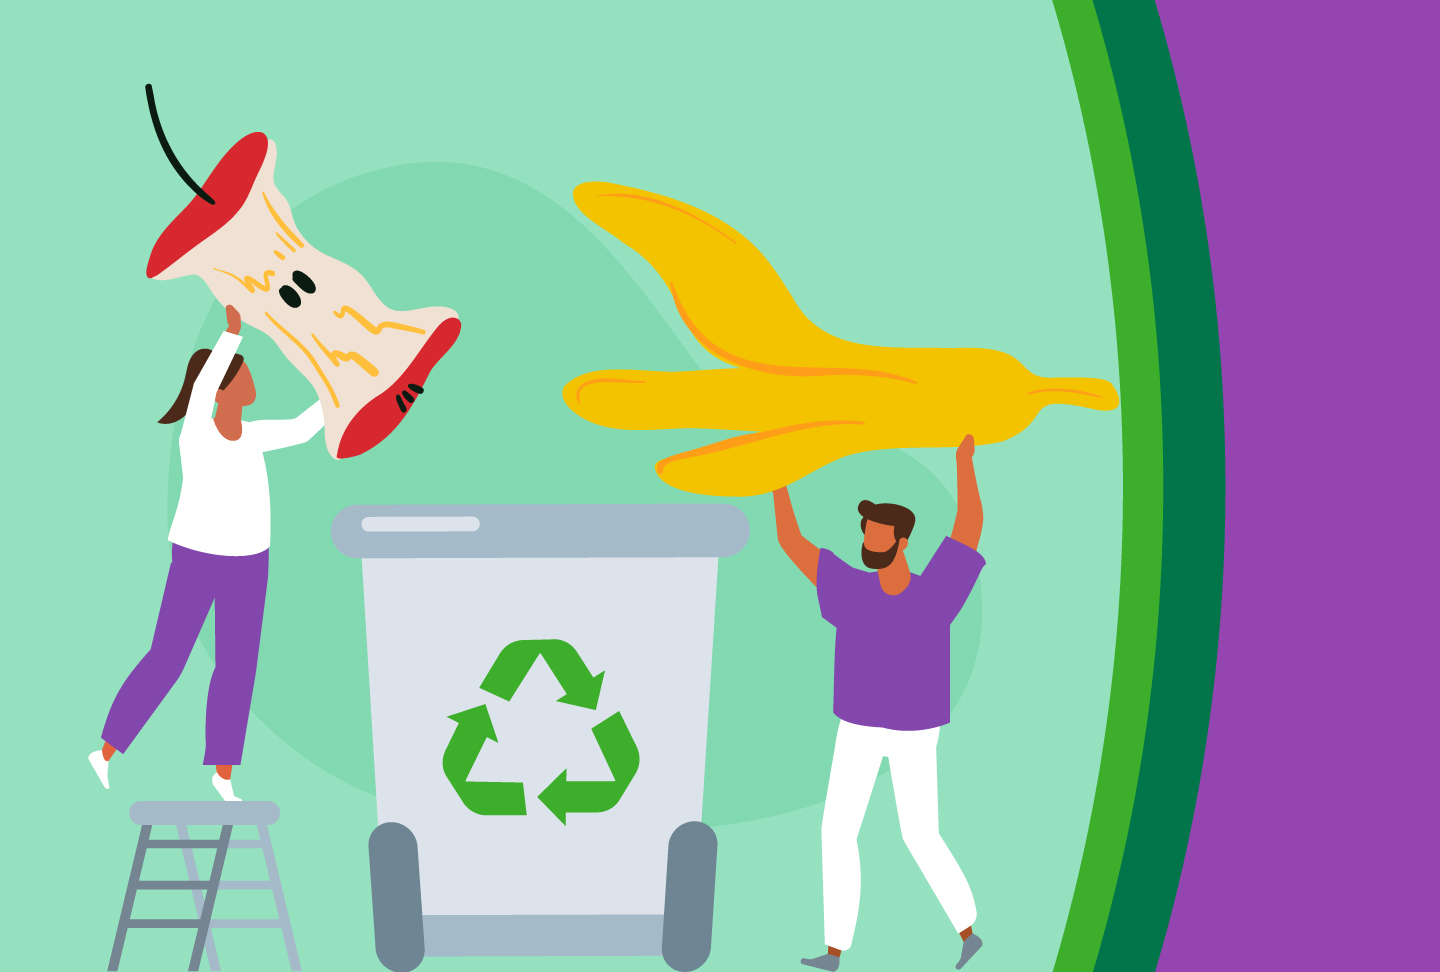 Illustration of people recycling apple core and banana peel